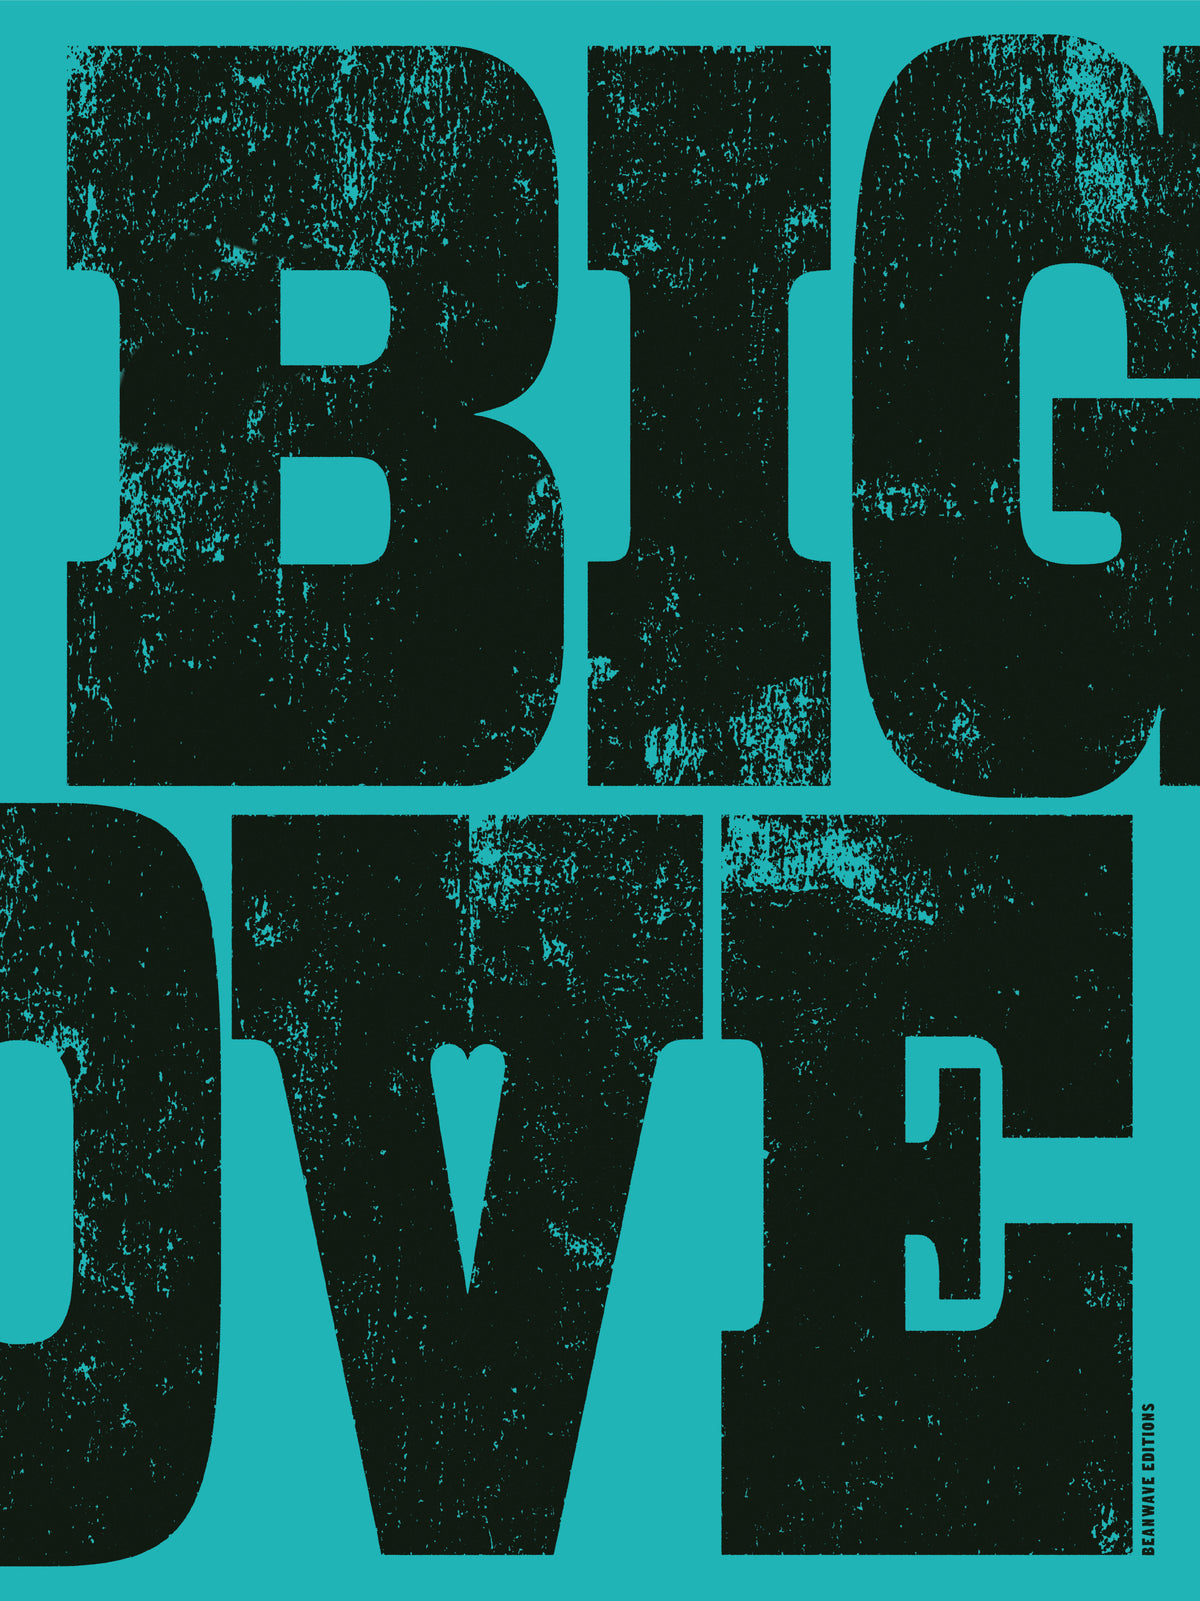 Big Love-Turquoise by Beanwave Editions